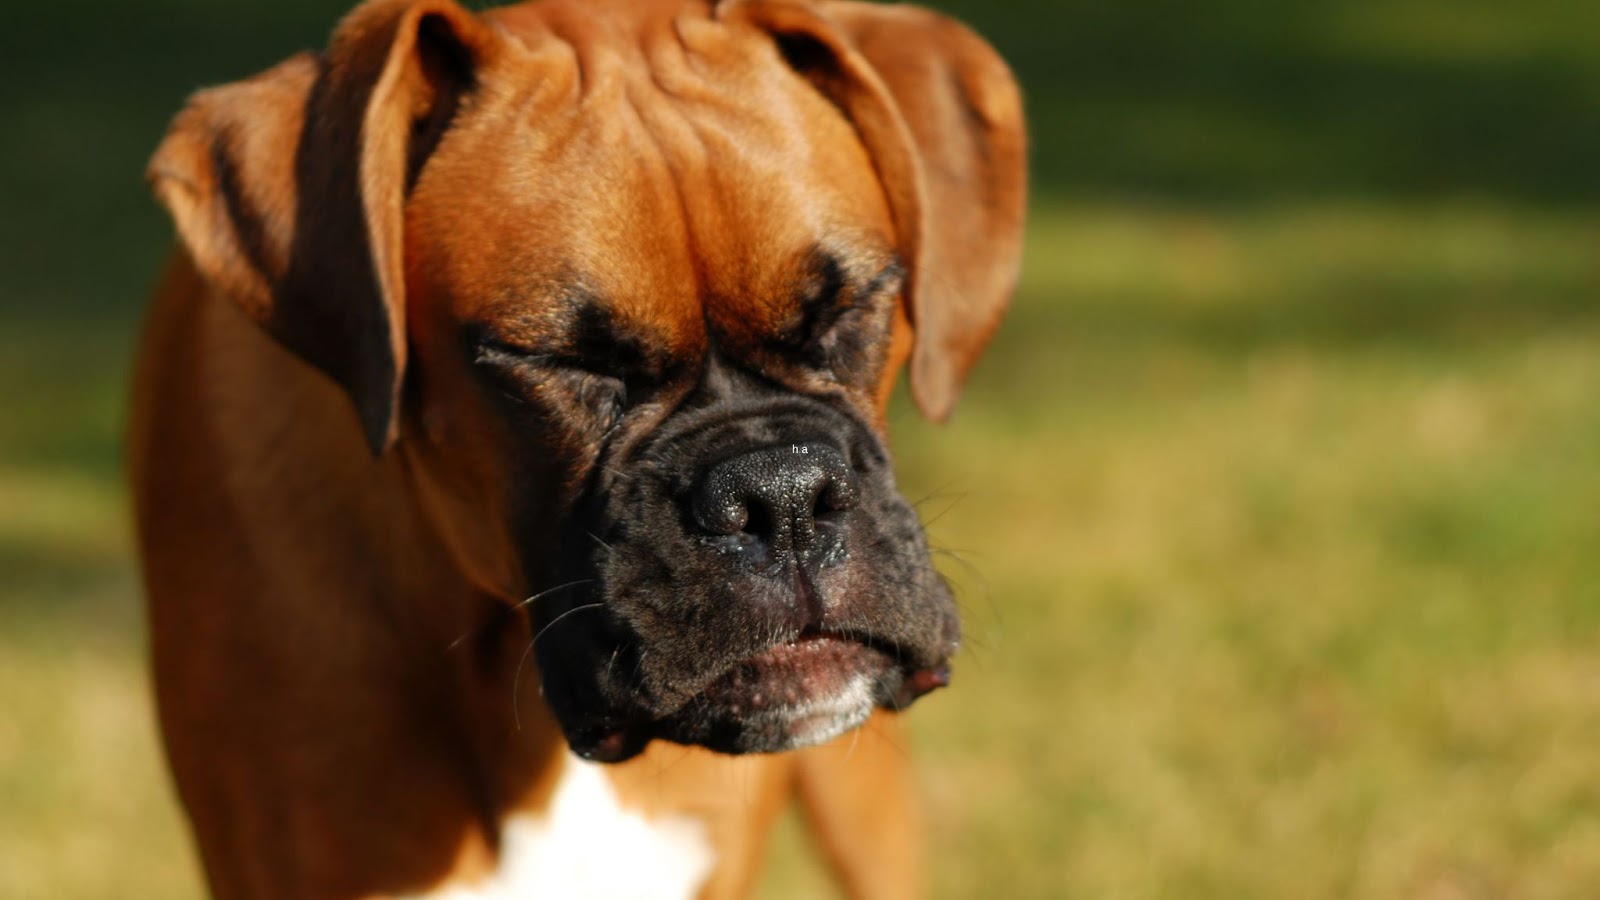 sneezing boxer dog outside in grass